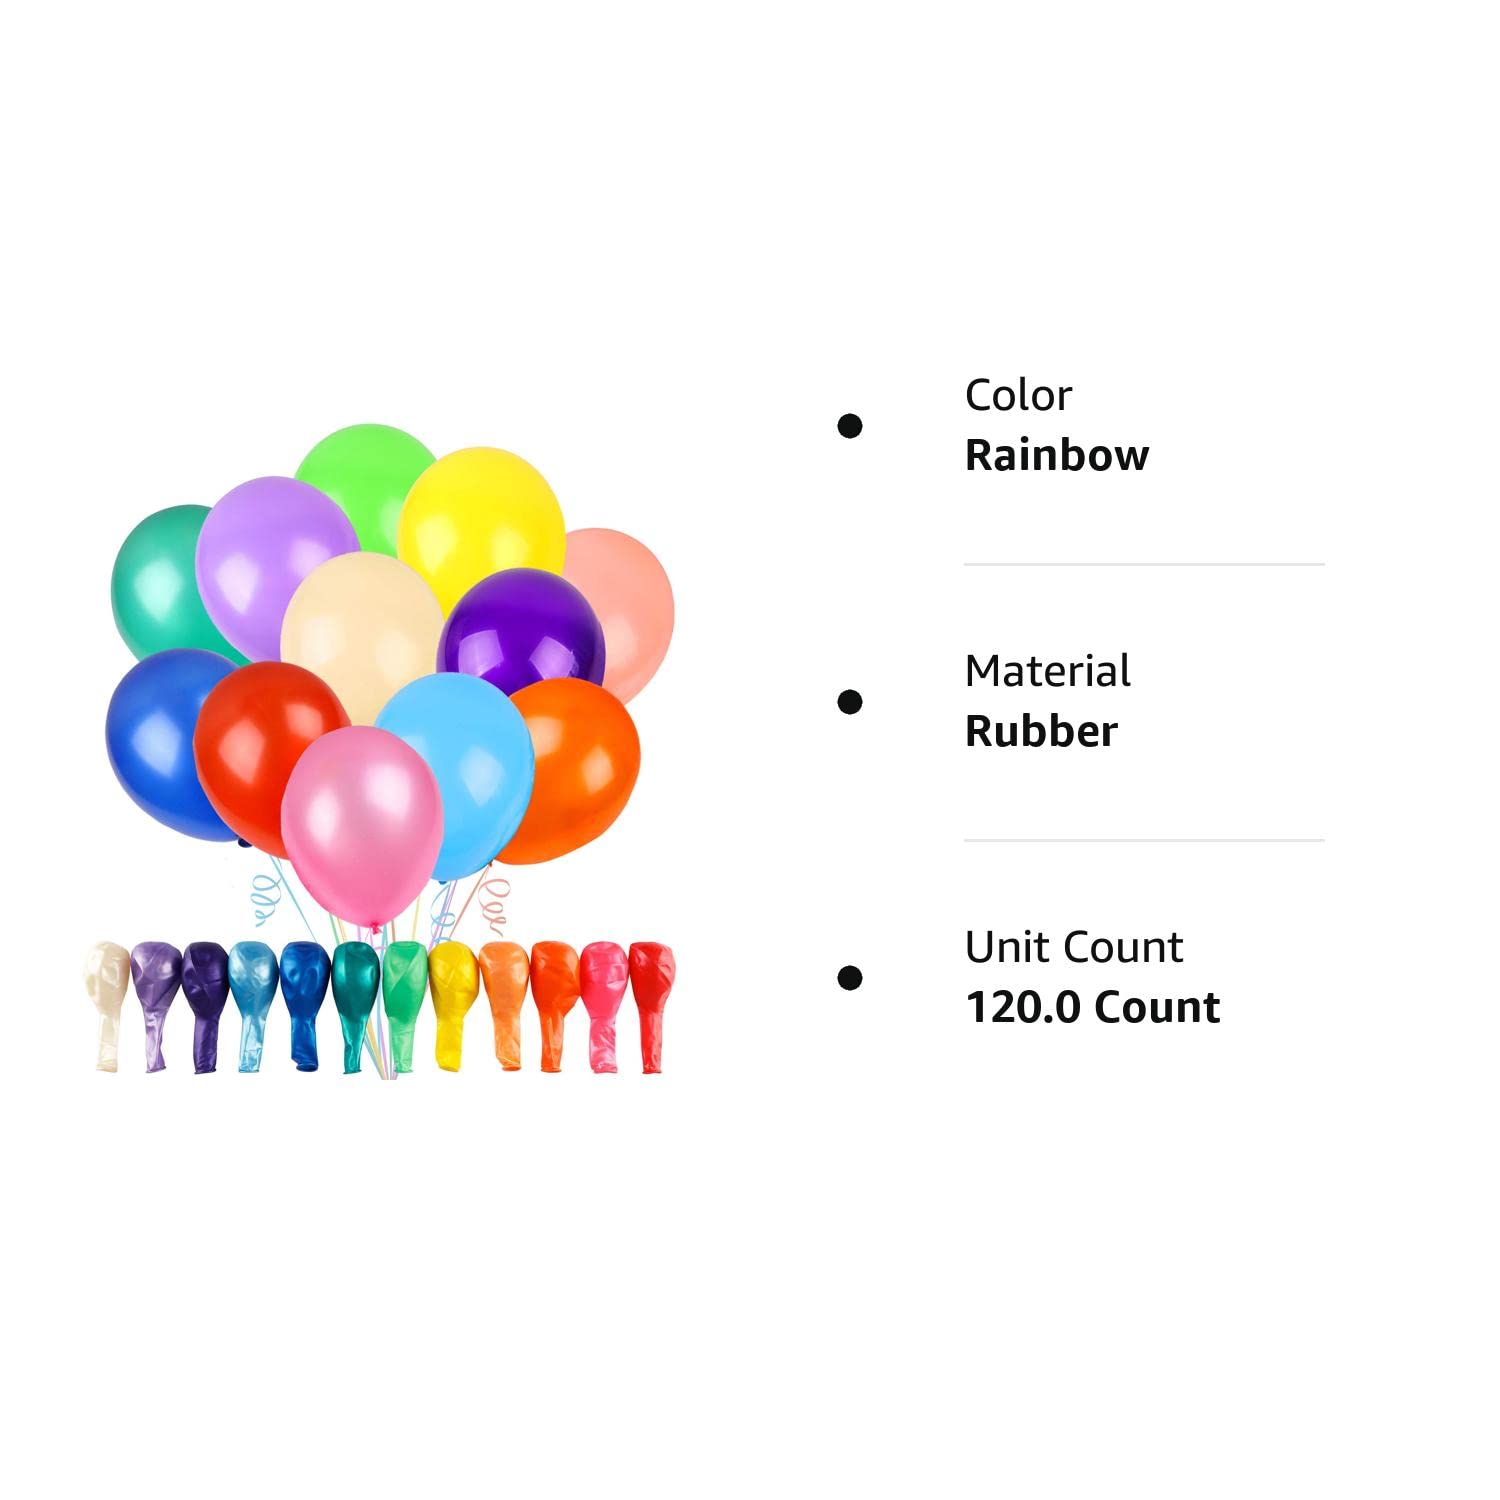 RUBFAC 120 Balloons Assorted Color 12 Inches Rainbow Latex Balloons, 12 Bright Color Party Balloons for Birthday Baby Shower Wedding Party Supplies Arch Garland Decoration